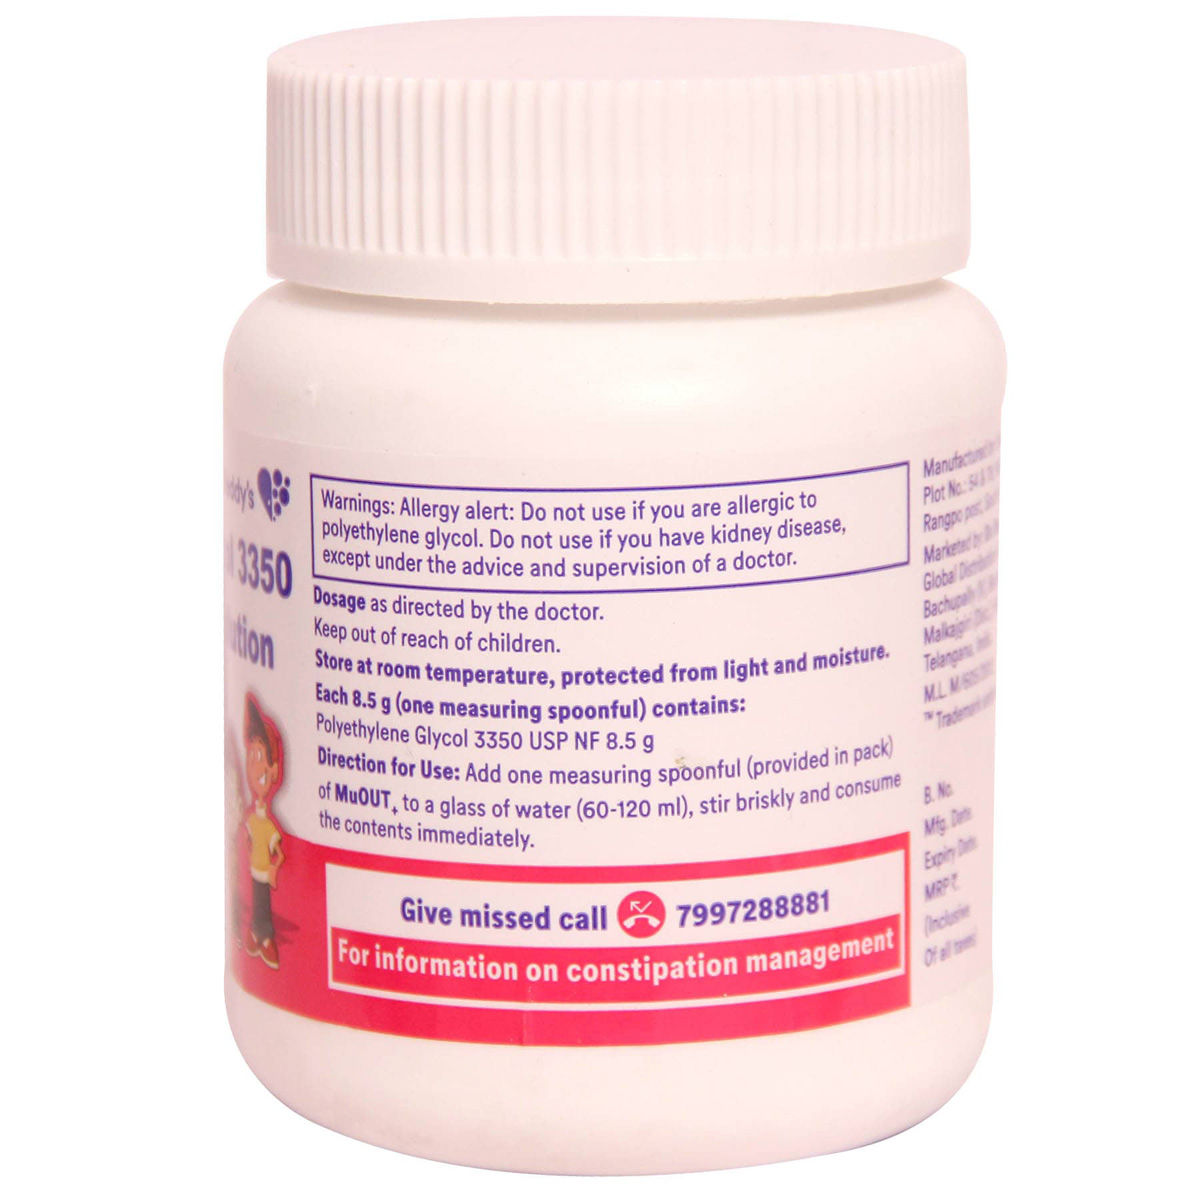 Muout Plus Powder 119 gm, Pack of 1 POWDER